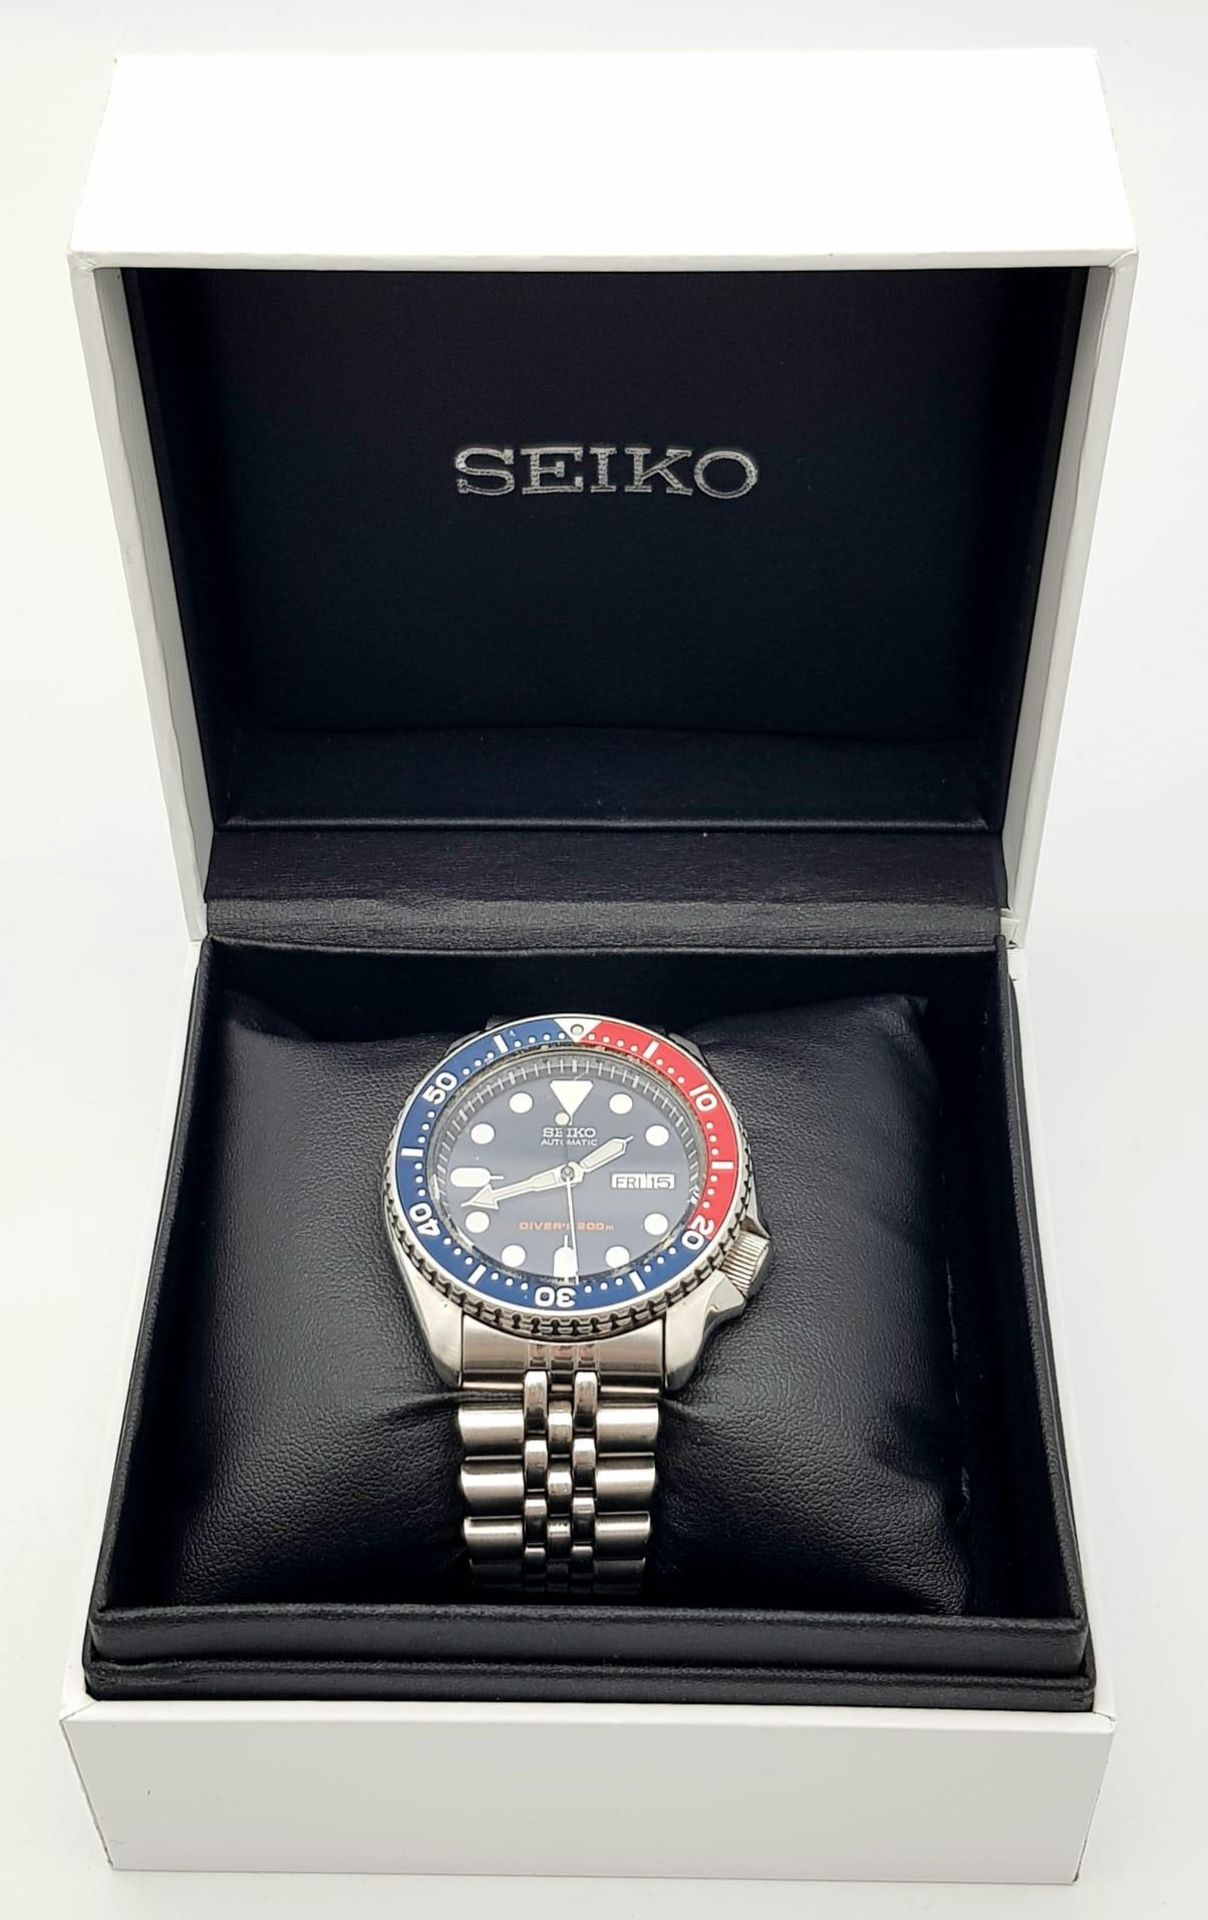 A Seiko 5 Divers 200M Automatic Gents Watch. Stainless steel bracelet and case - 42mm. Blue dial - Image 4 of 7